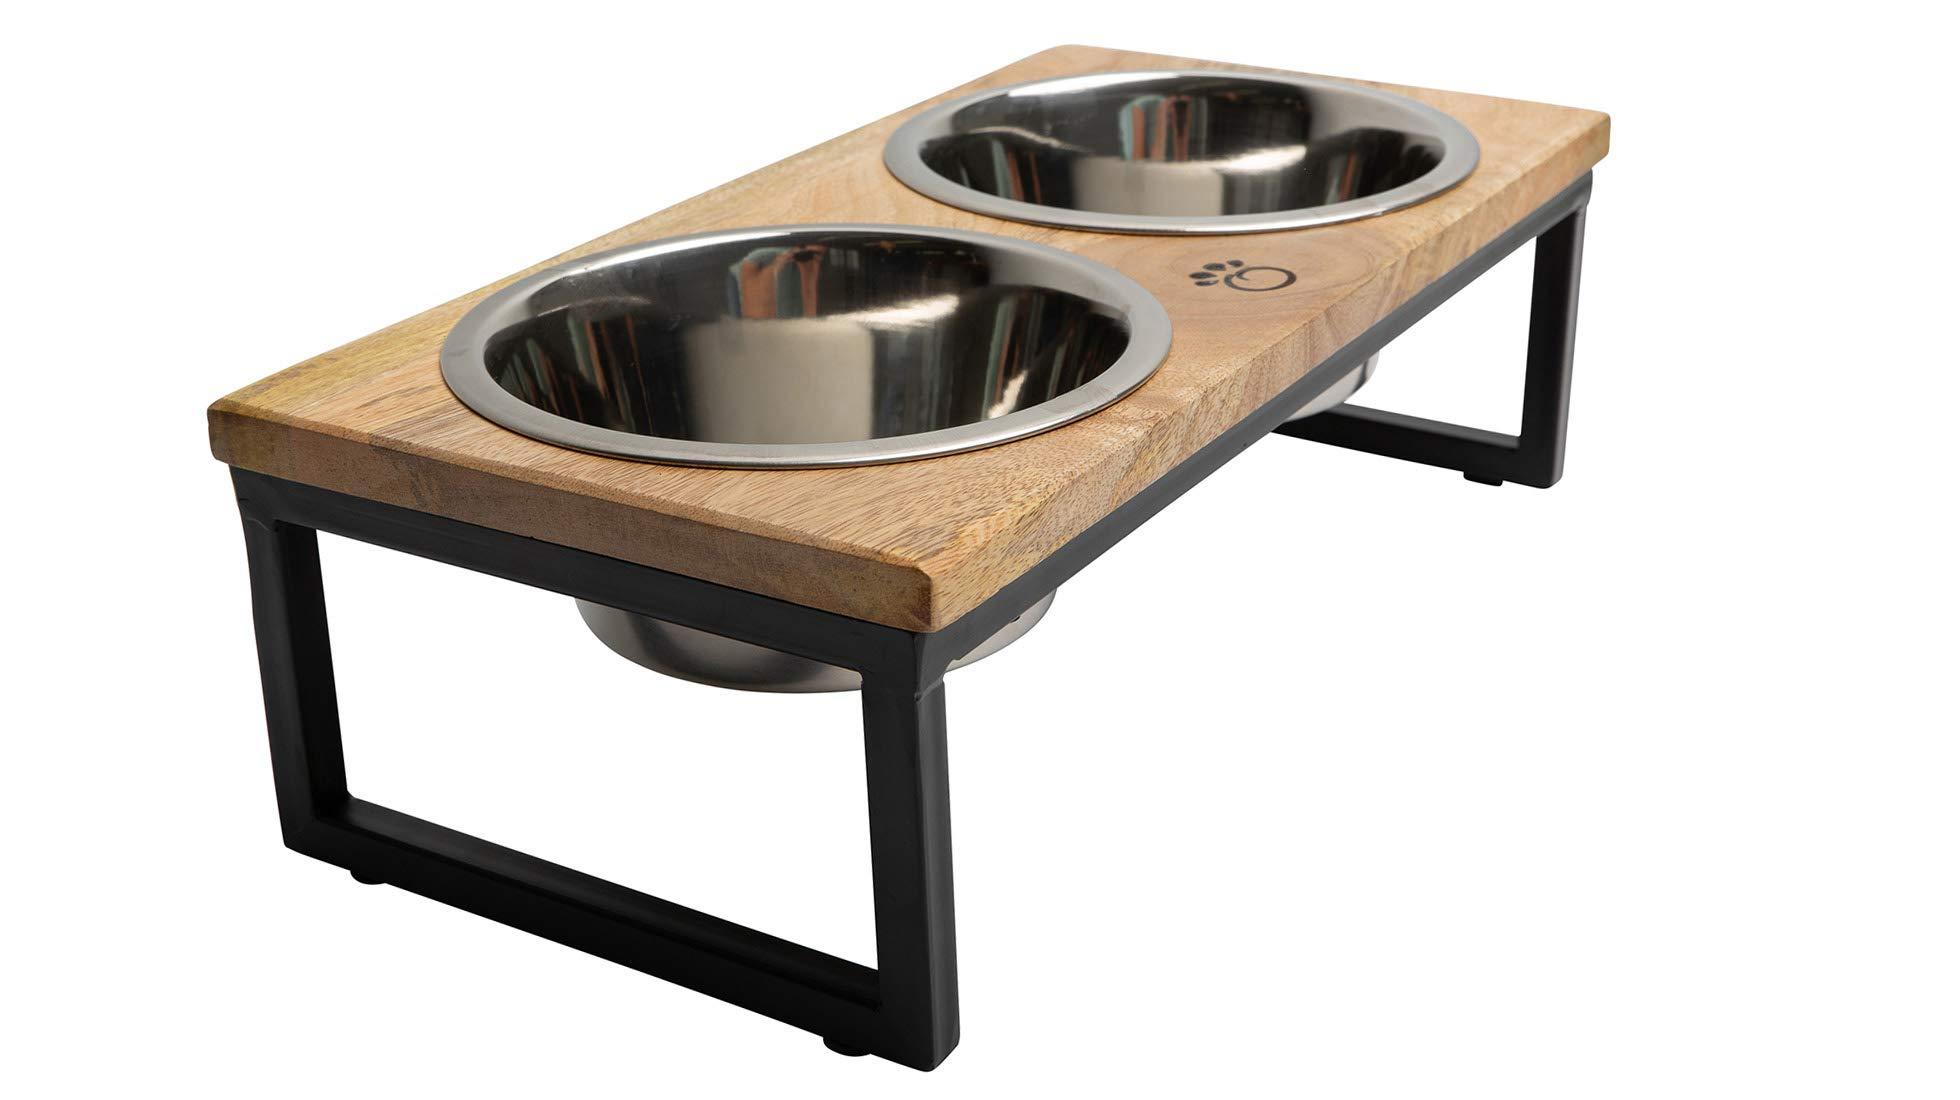 Brave Bark Wood & Metal Feeder - Premium Mango Wood Feeder with Metal Stand, 2 Stainless Steel Bowls for Food or Water Included, Perfect for Dogs,Cats and Pets of Any Size, for Home or Office (Medium)